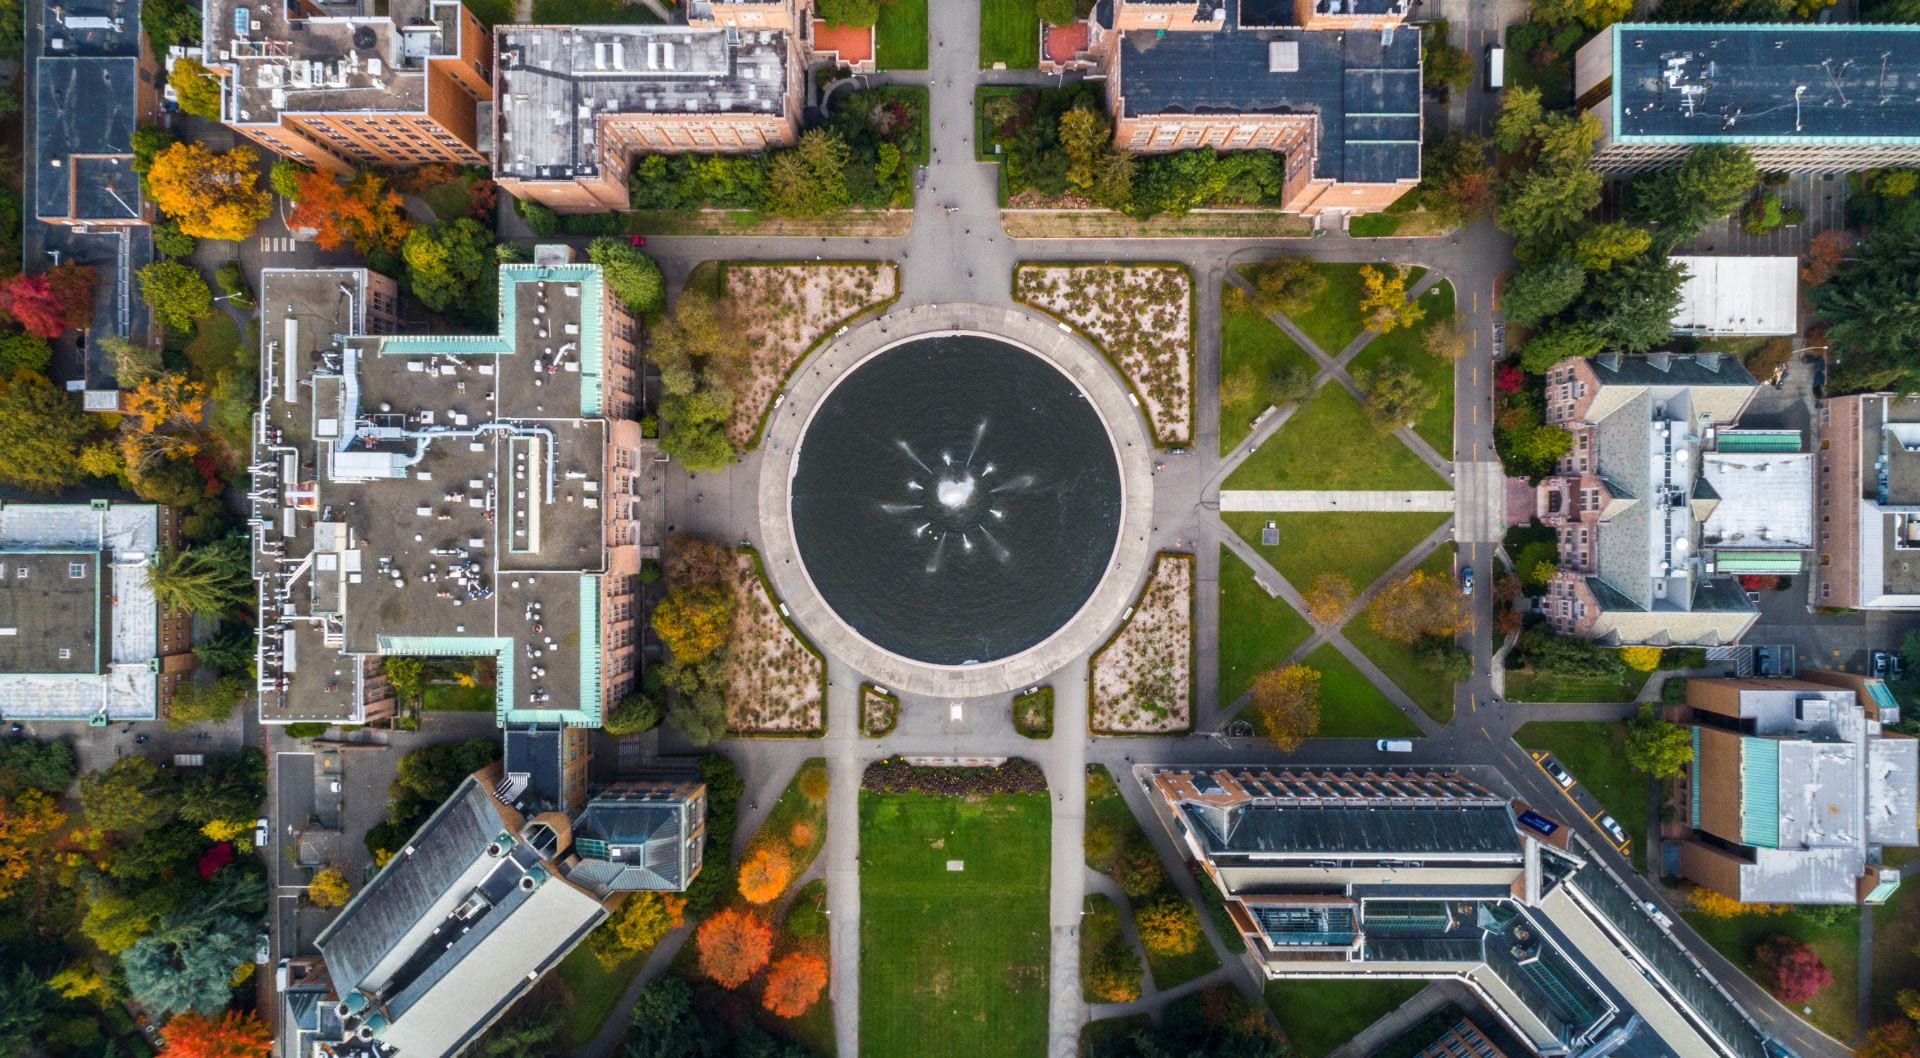 Aerial view of Drumheller Fountain at the University of Washington Seattle Campus